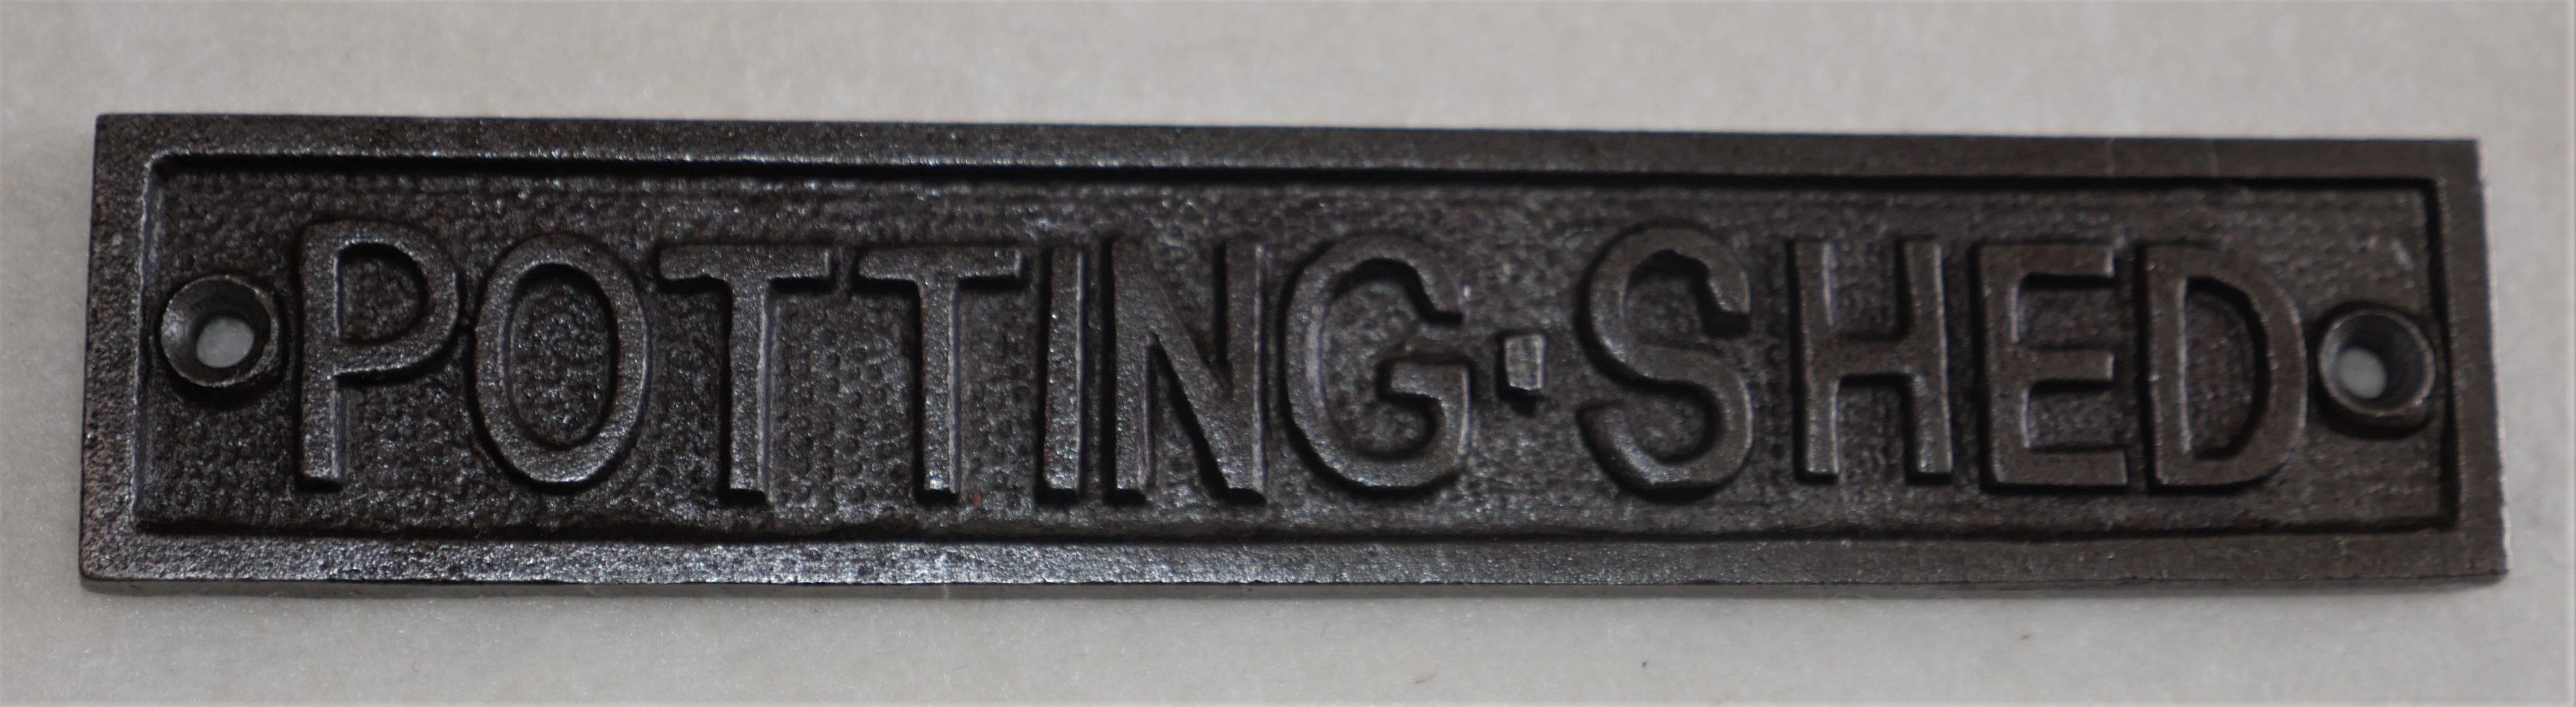 Cast iron Potting shed sign.